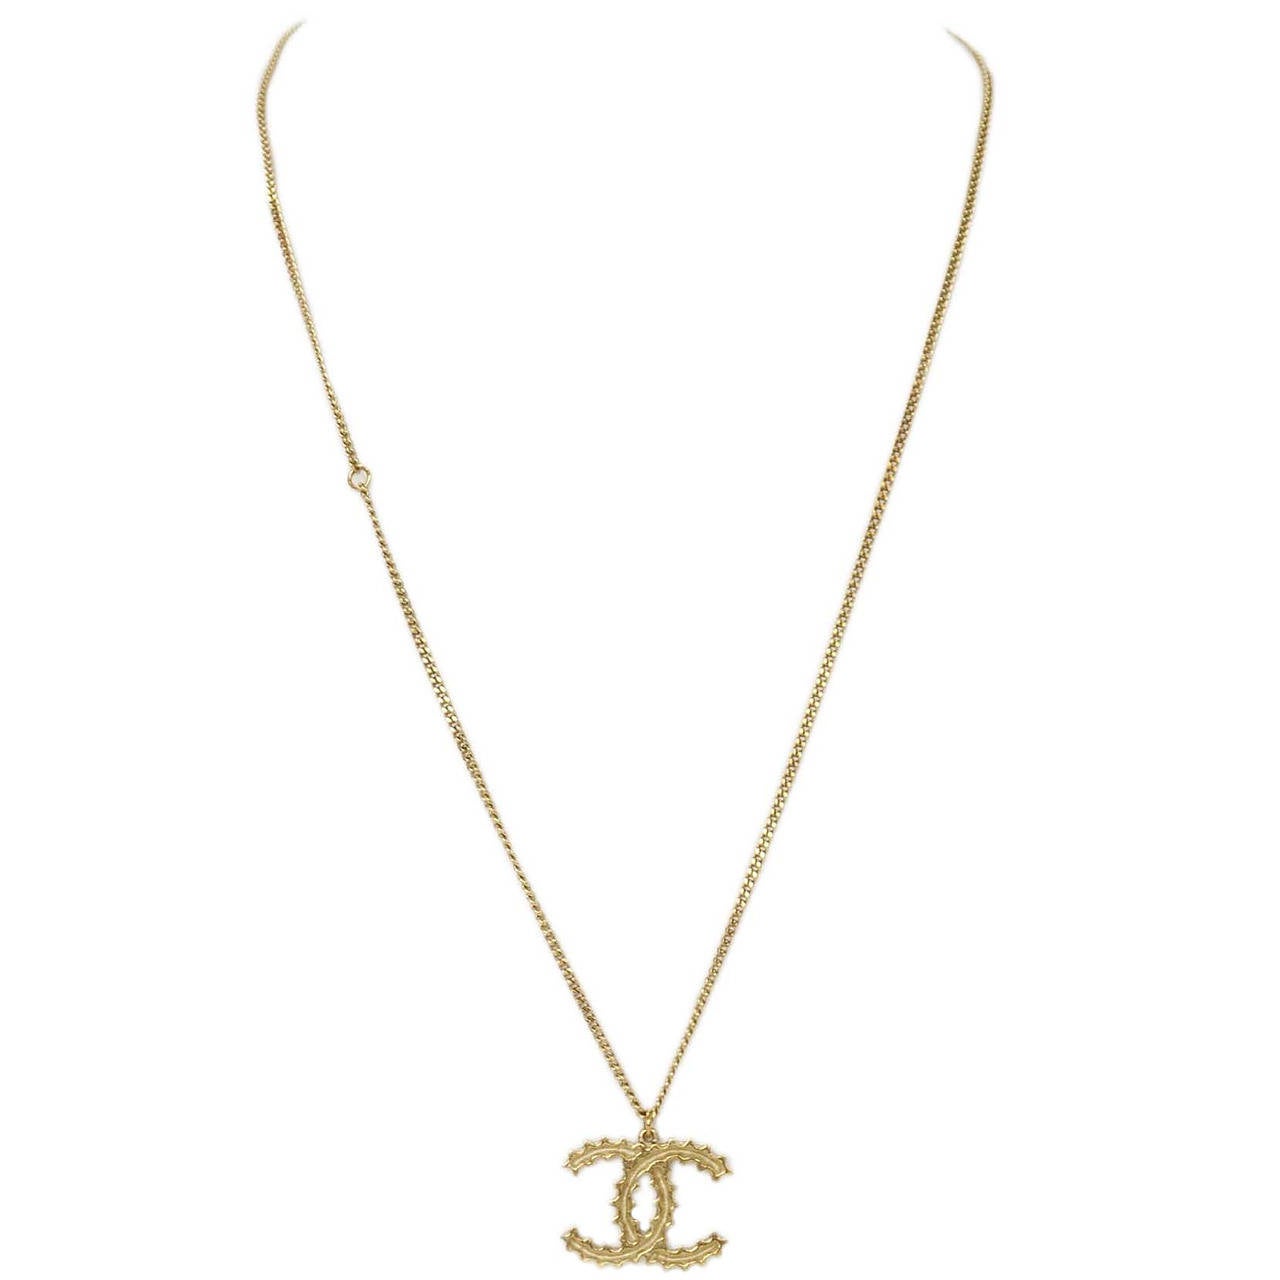 Chanel 2014 Goldtone Textured CC Charm Necklace